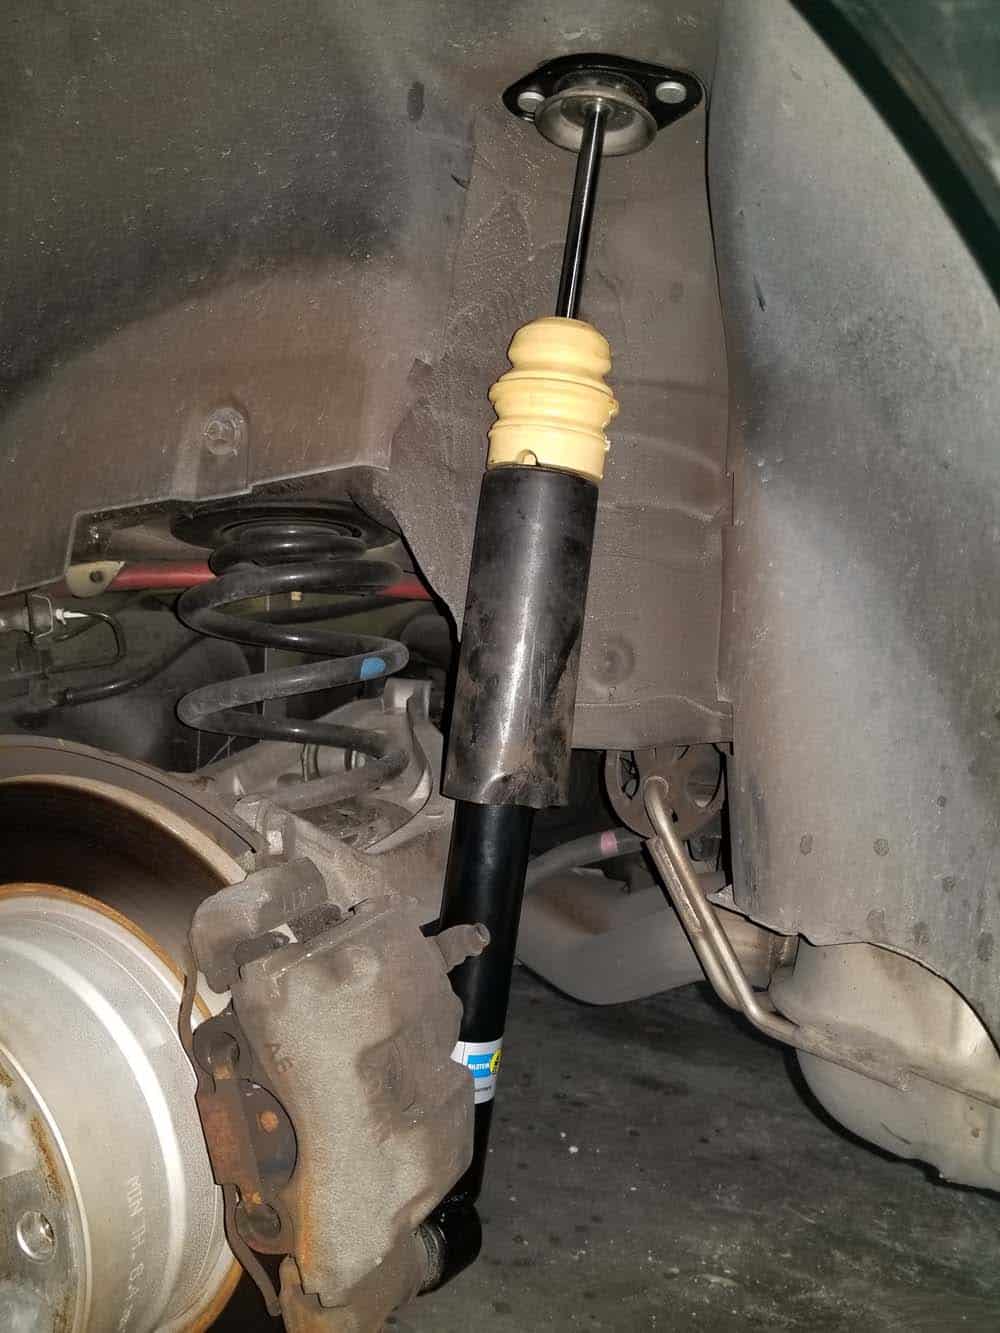 Install the new shock back in the vehicle.